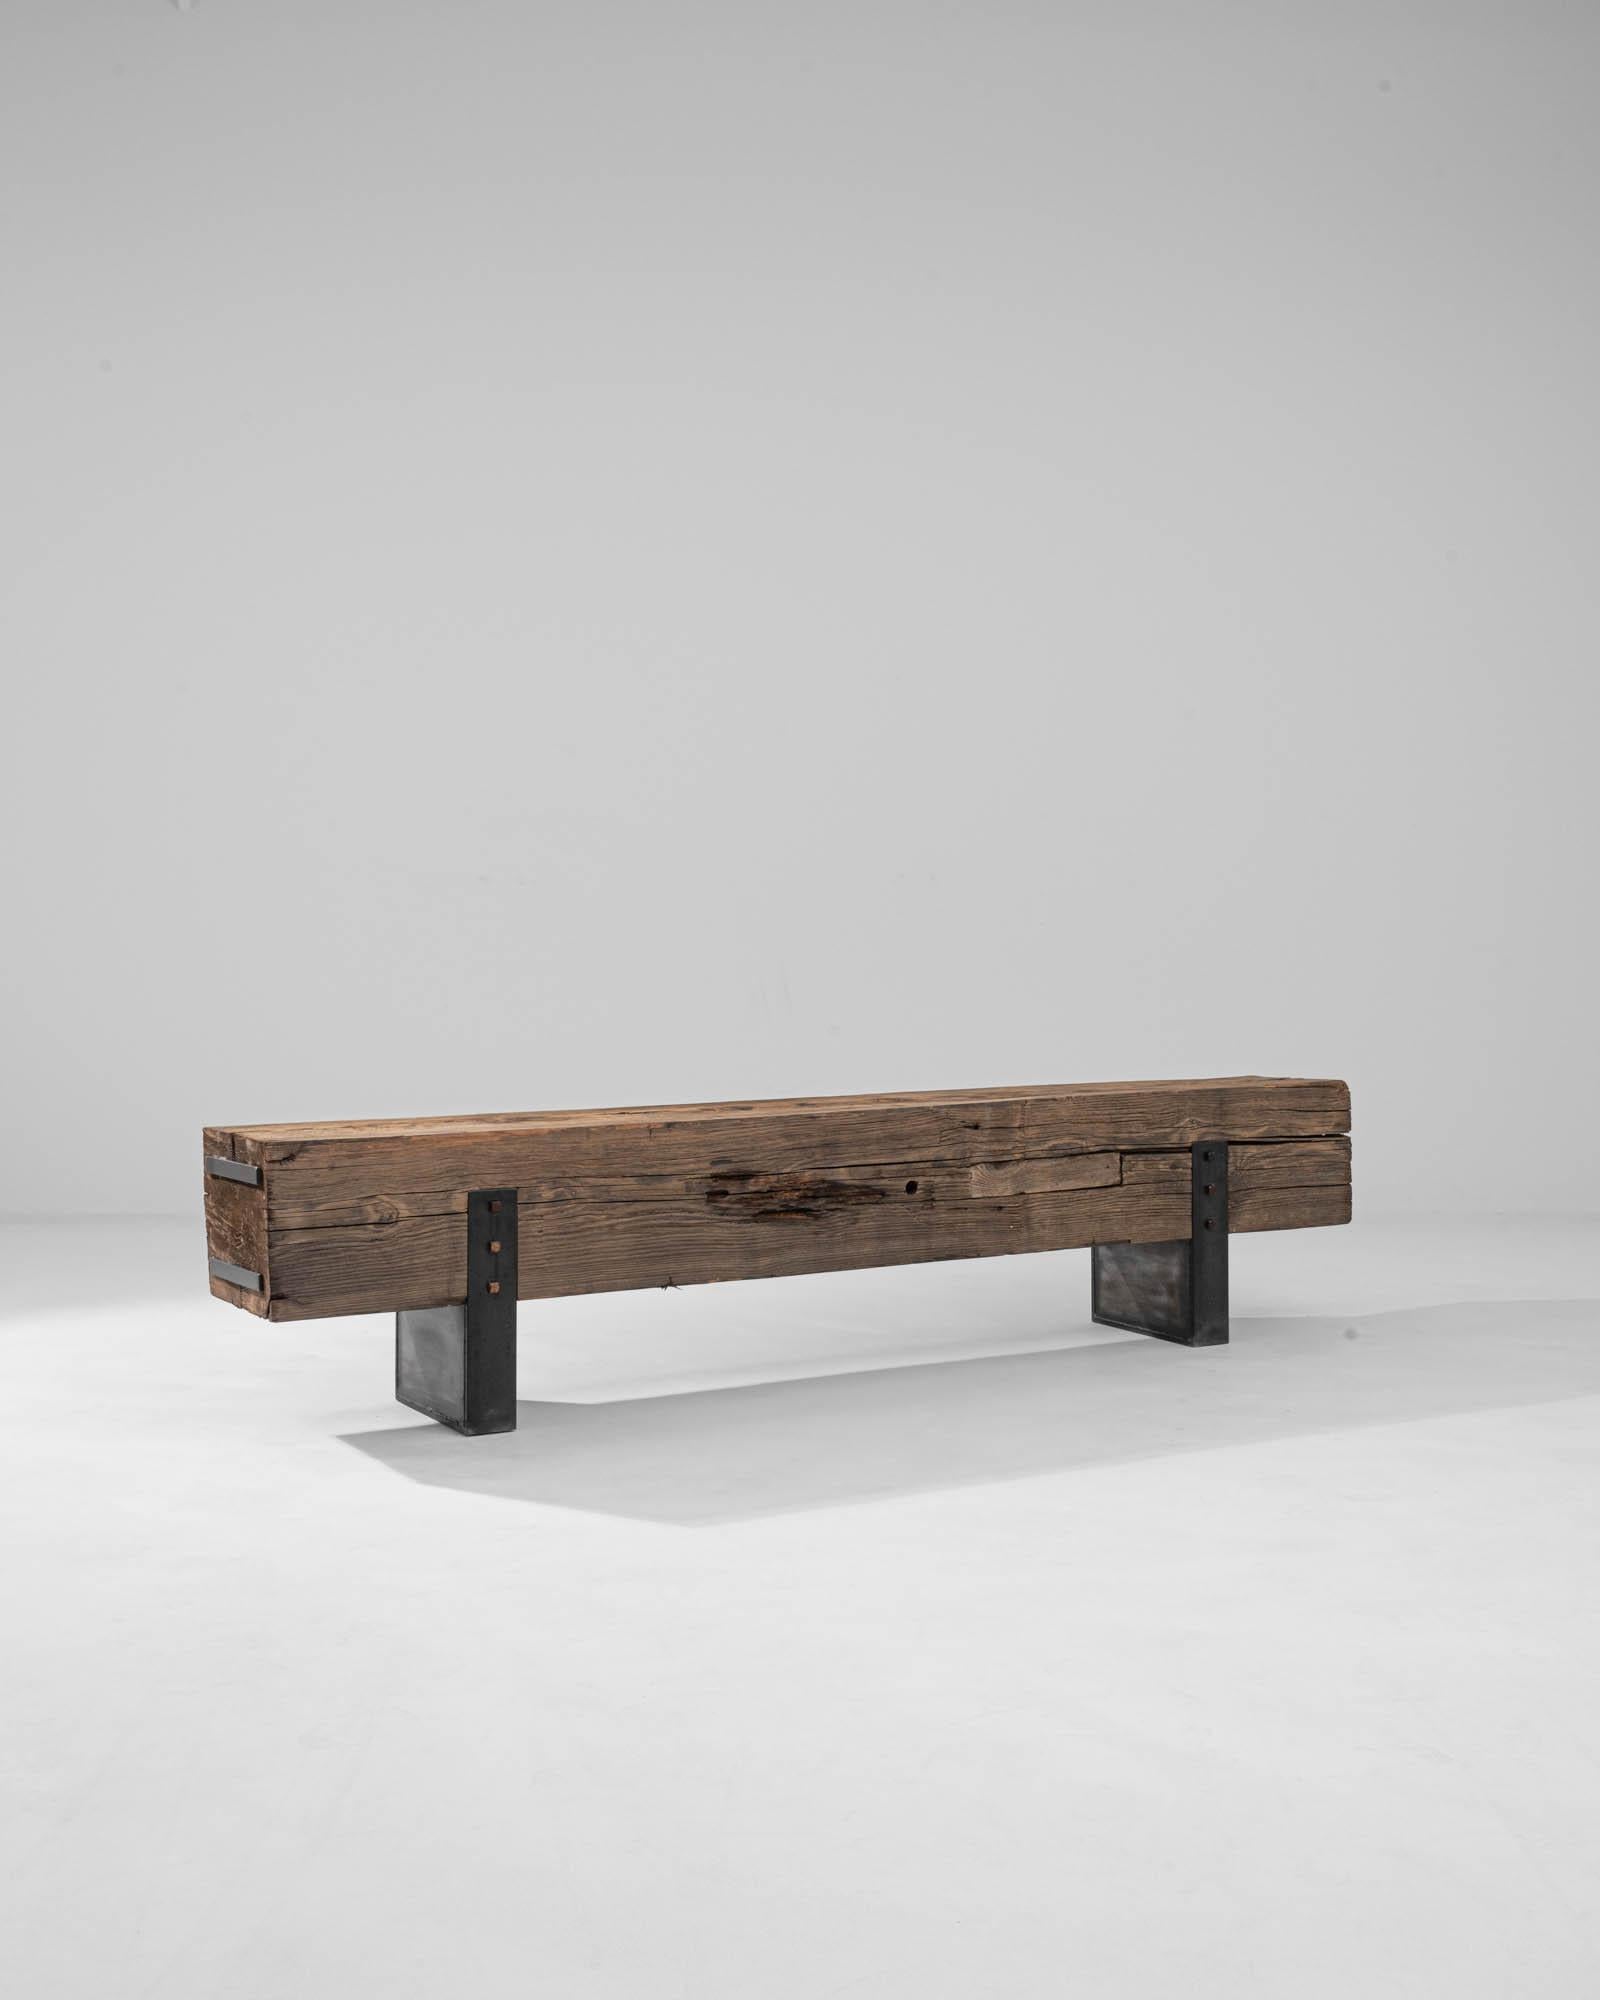 Rustic Antique Central European Timber Bench